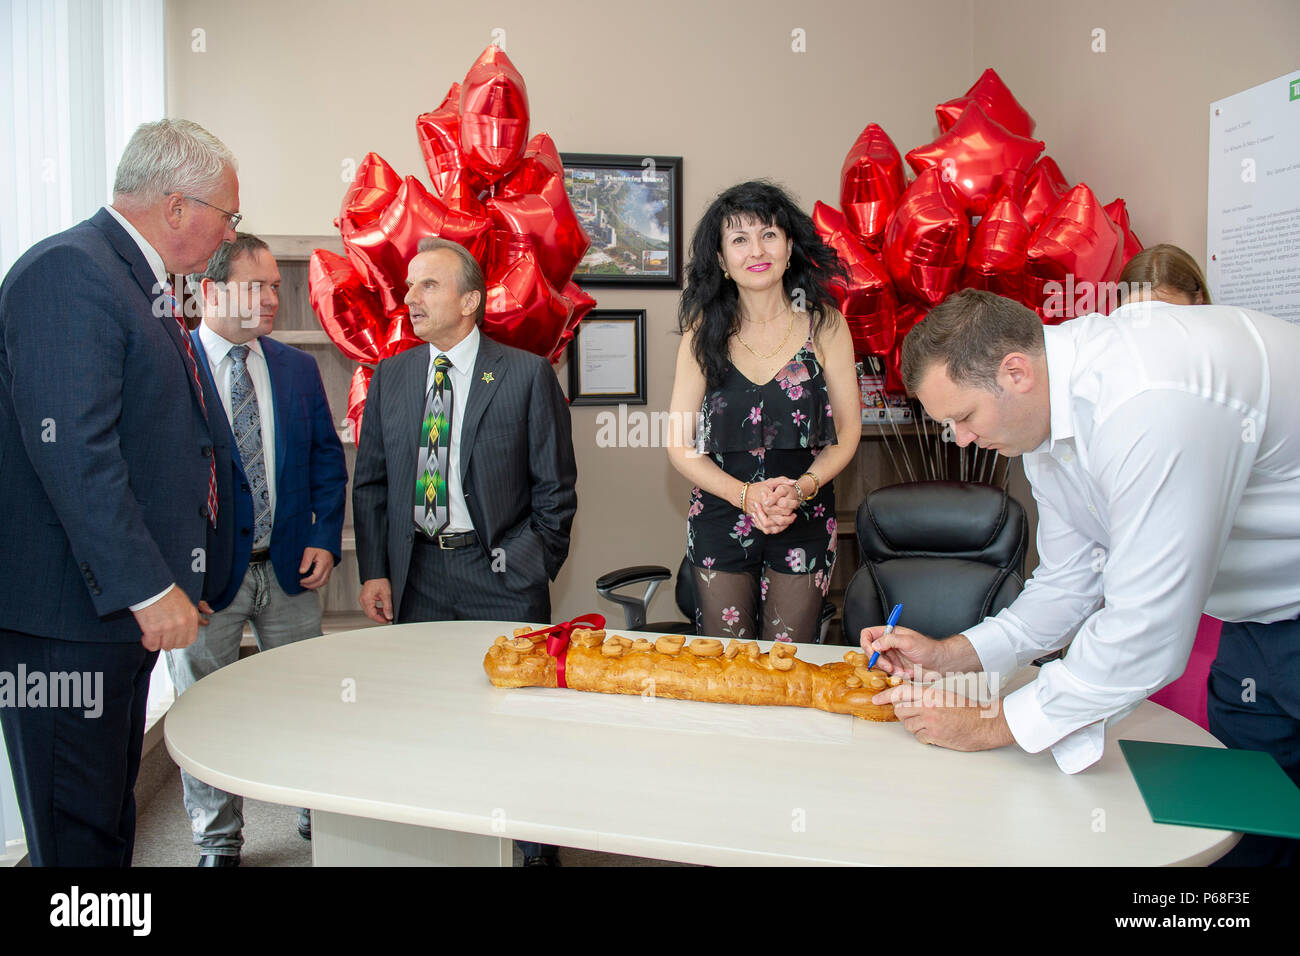 Barrie, Ontario, Canada. 28th June 2018. Elected officials from Federal - MP John Brassard and MP Alex Nuttall, Provincial - MPP Andrea Khanjin and MPP Doug Downey, and City of Barrie - Mayor Jeff Lehman joined together in welcoming and celebrating the grand opening of HomeLife All Points Realty Inc., Brokerage office in Barrie with franchise owner Julia Stanford, Broker of Record, and Robert Stanford and HomeLife Realty Services founder Andrew Cimerman. Credit: EXImages/Alamy Live News Stock Photo